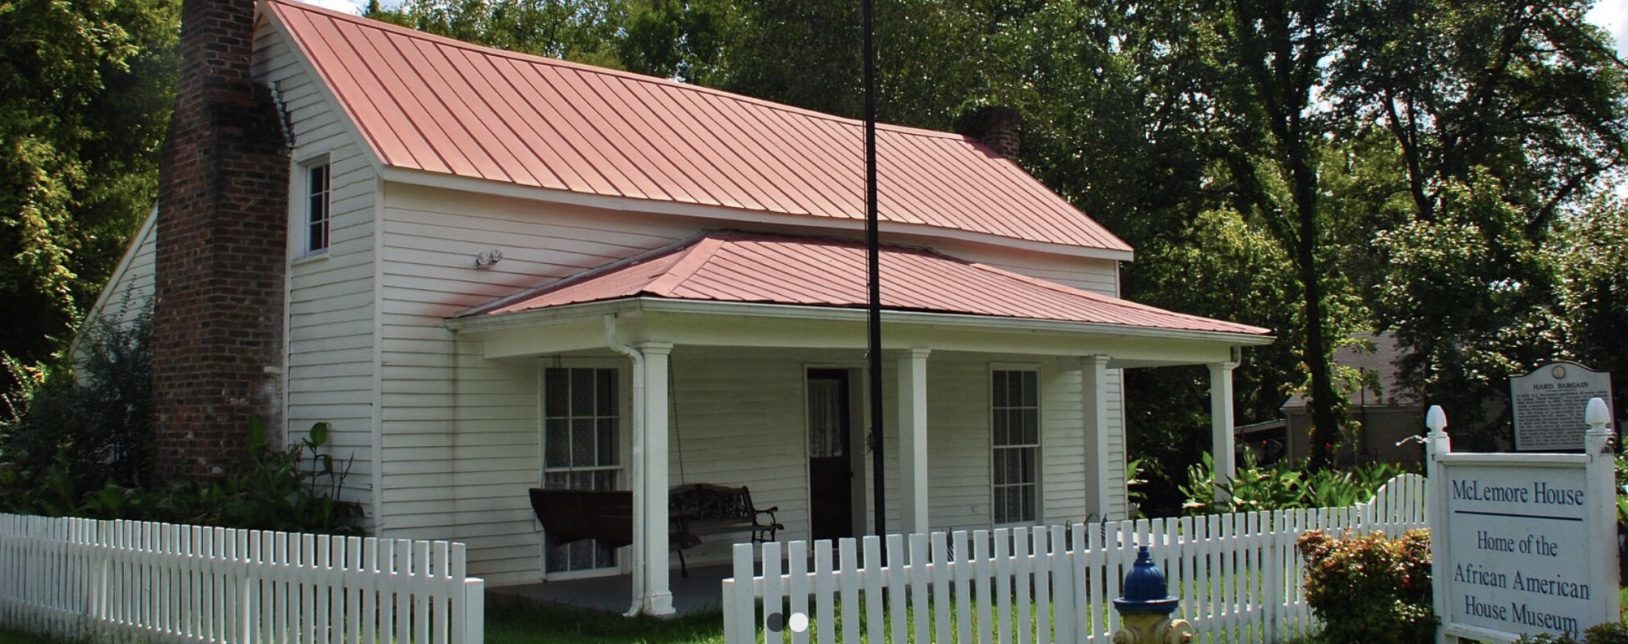 McLemore House Museum in Franklin